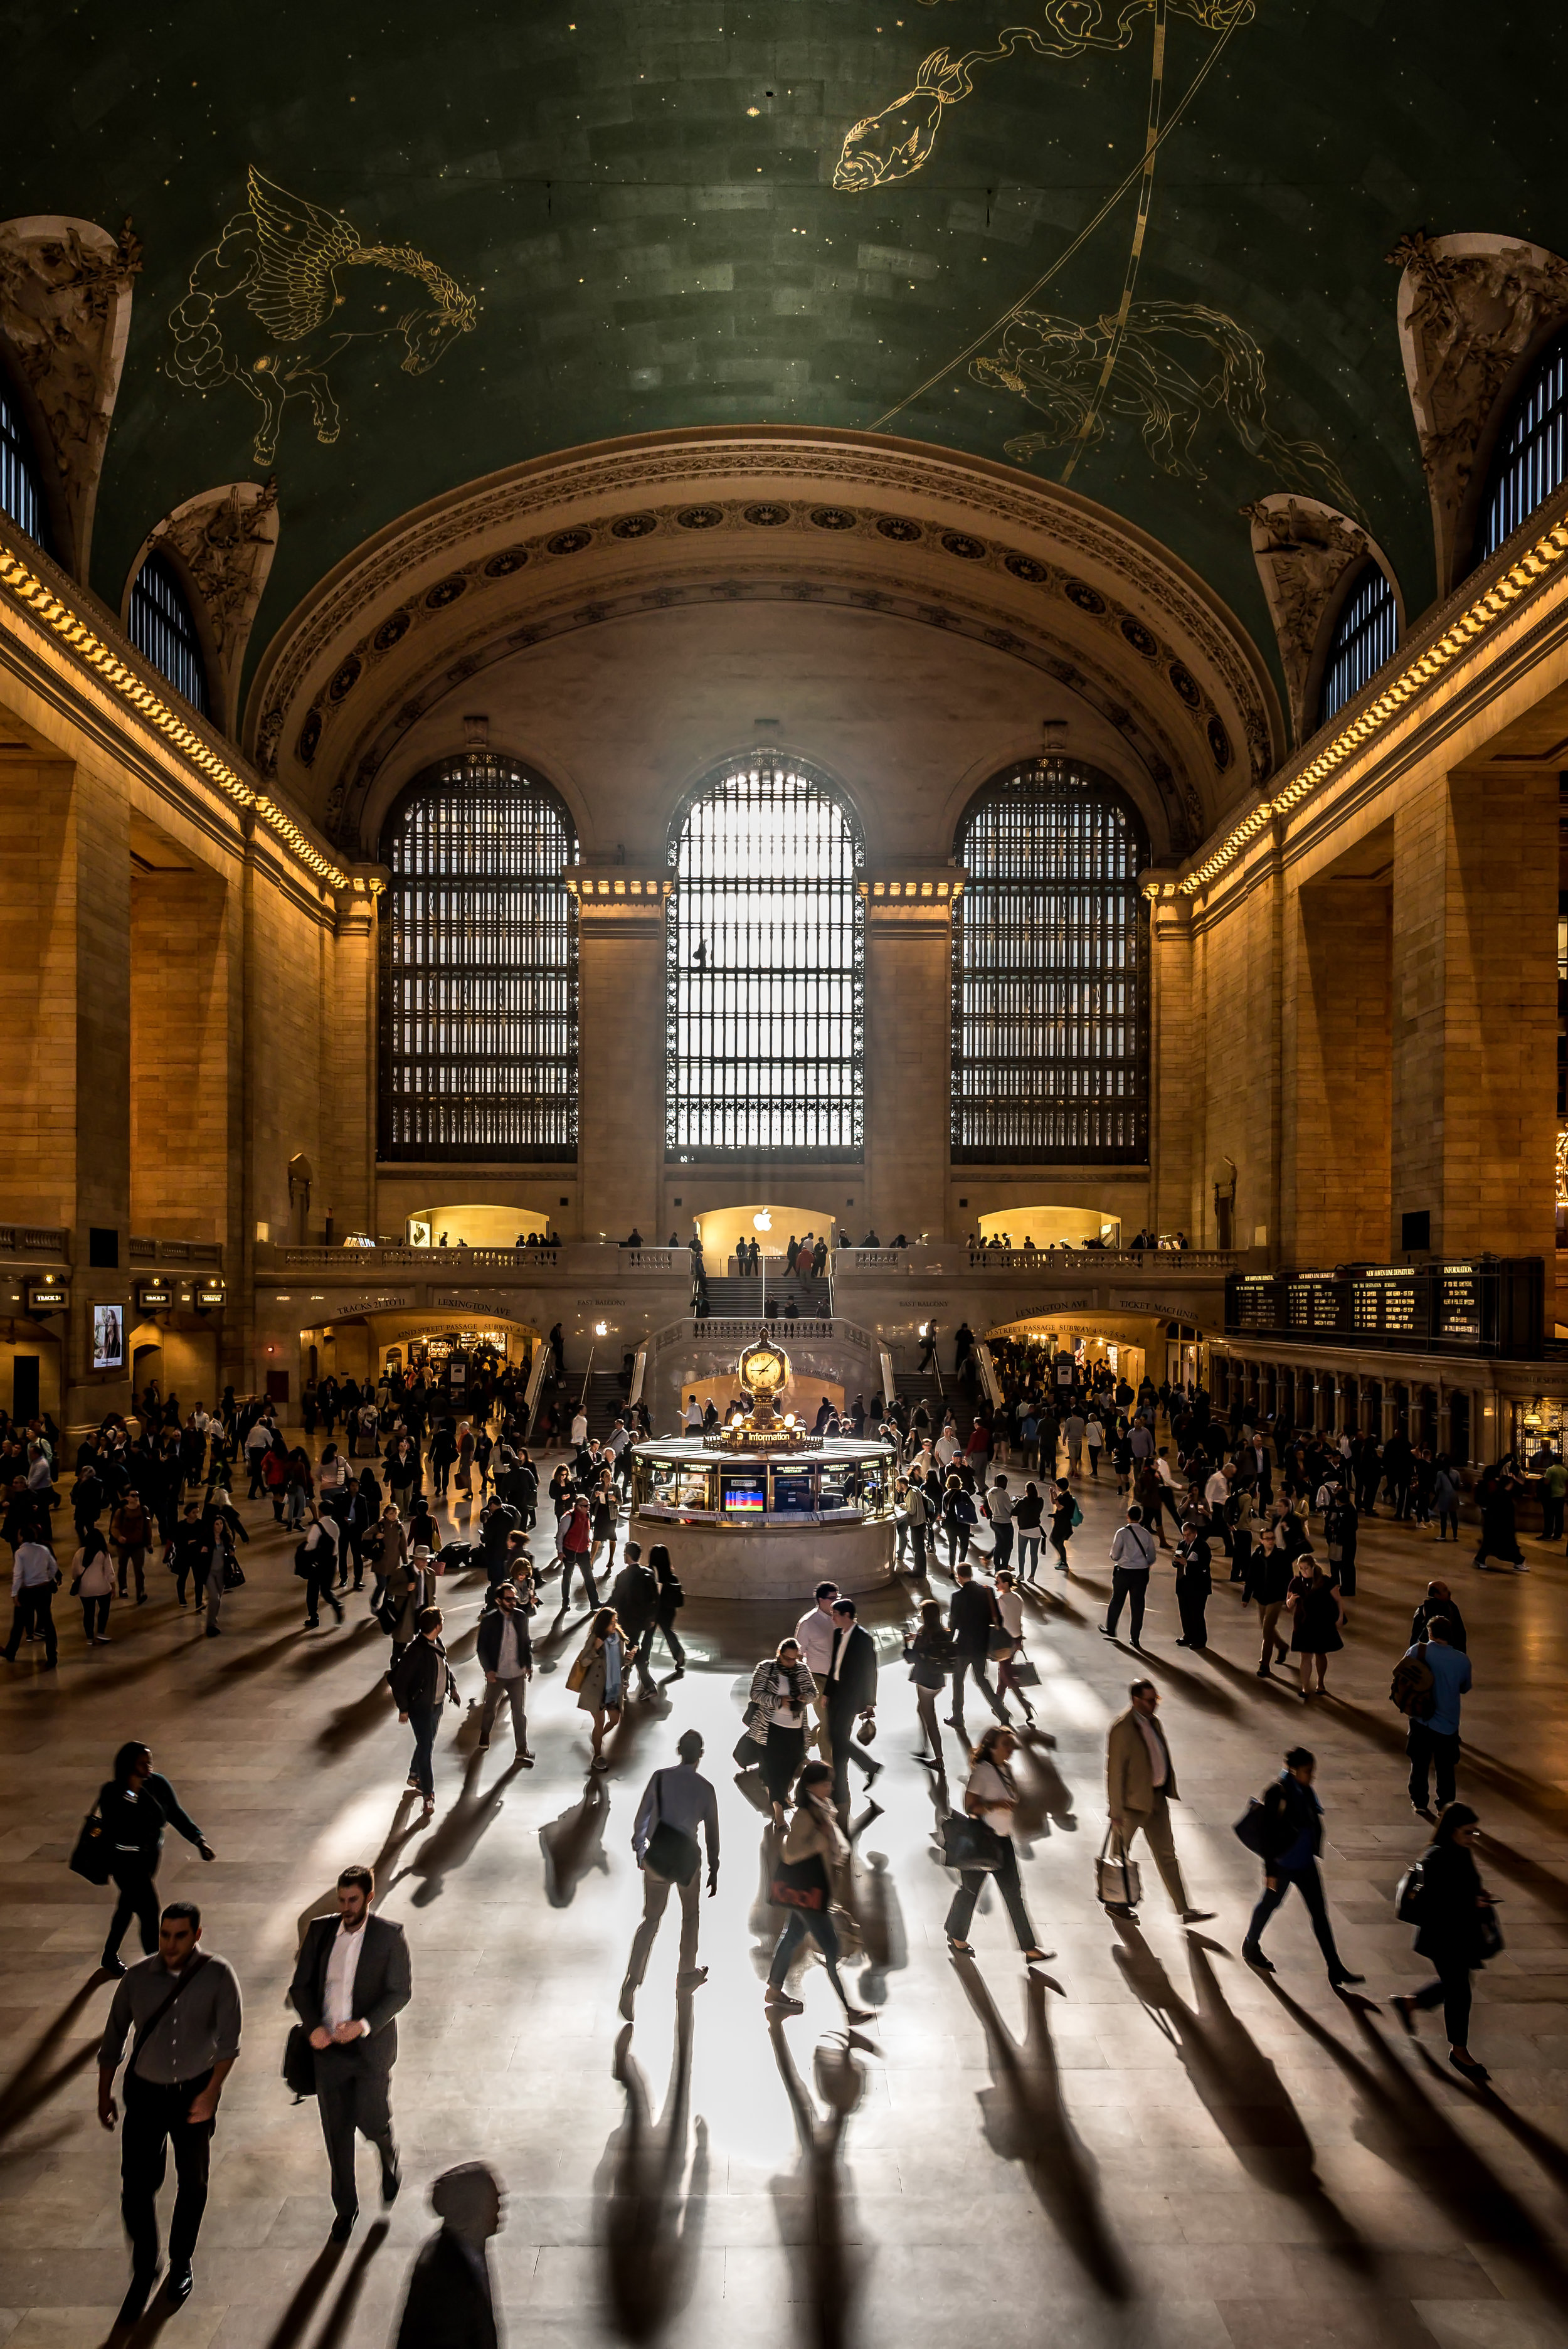 Travel category winner, Javan Ng, Morning rush hour at Grand Central Terminal in New York